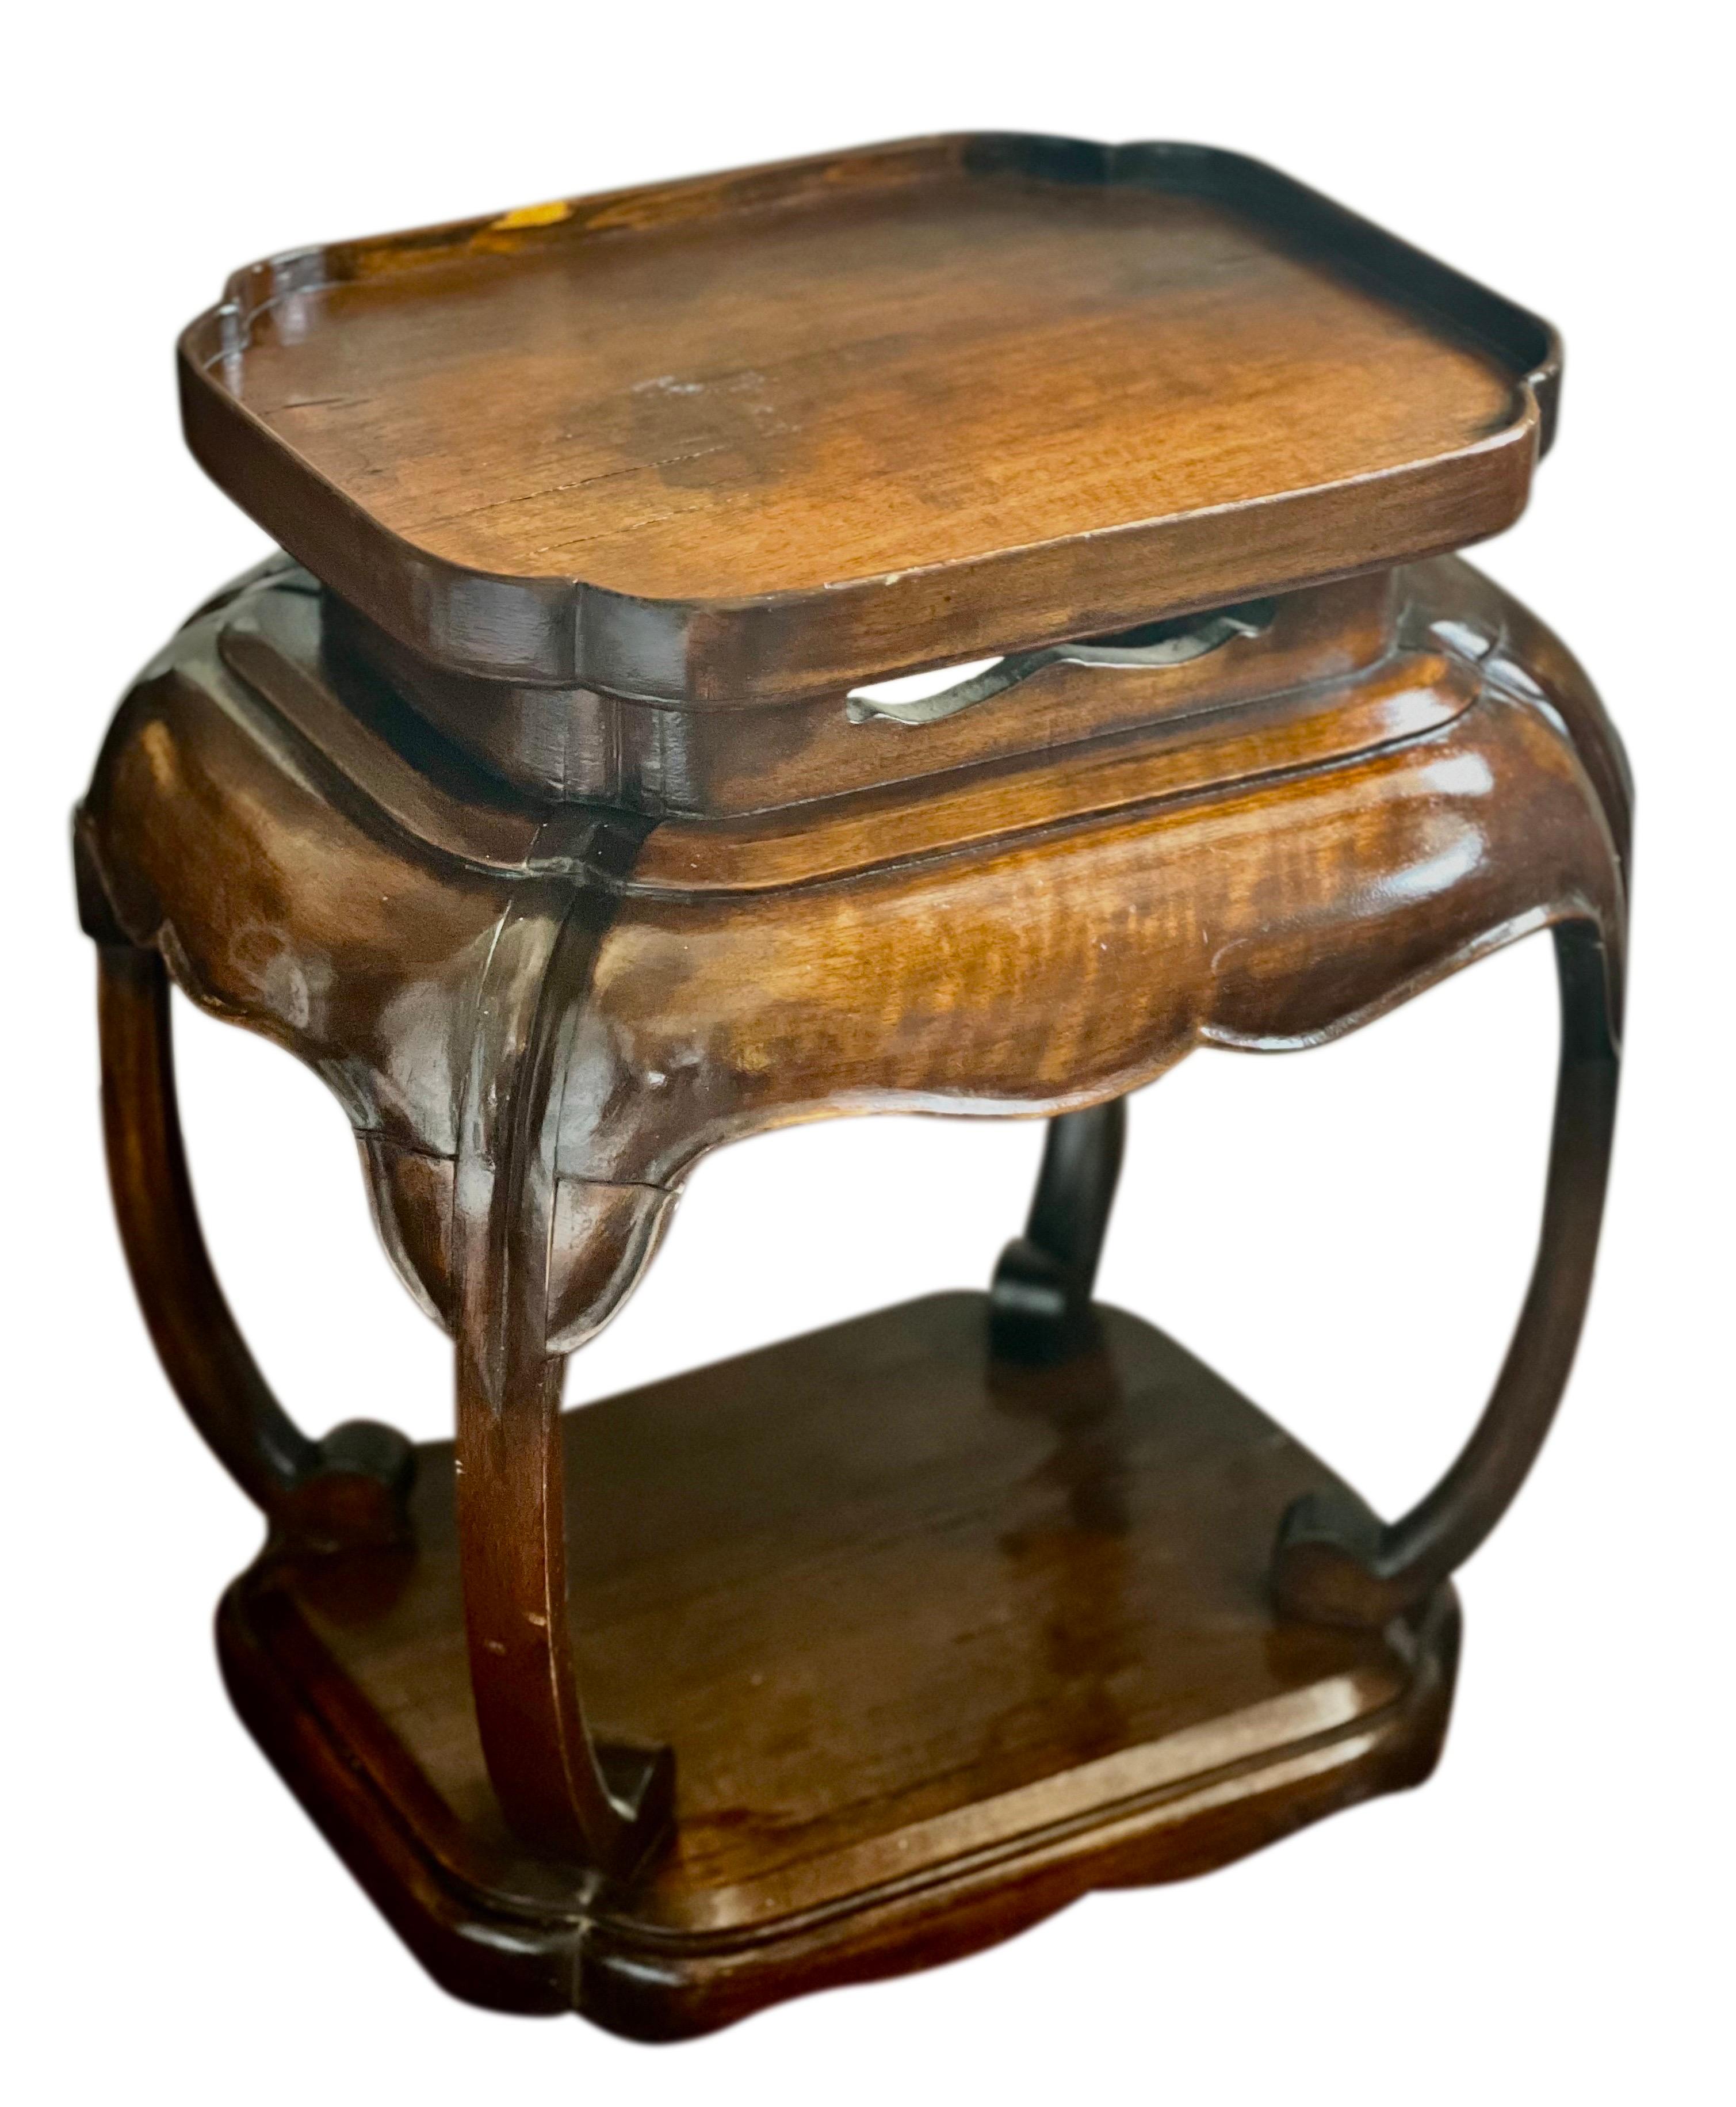 A fabulous Italian, Asian inspired mahogany two-tier low side table, circa 1940's. 

This unique table boasts all the hallmarks of beautiful Italian craftsmanship with graceful curvature and carved details. It was crafted during a time in Italy when